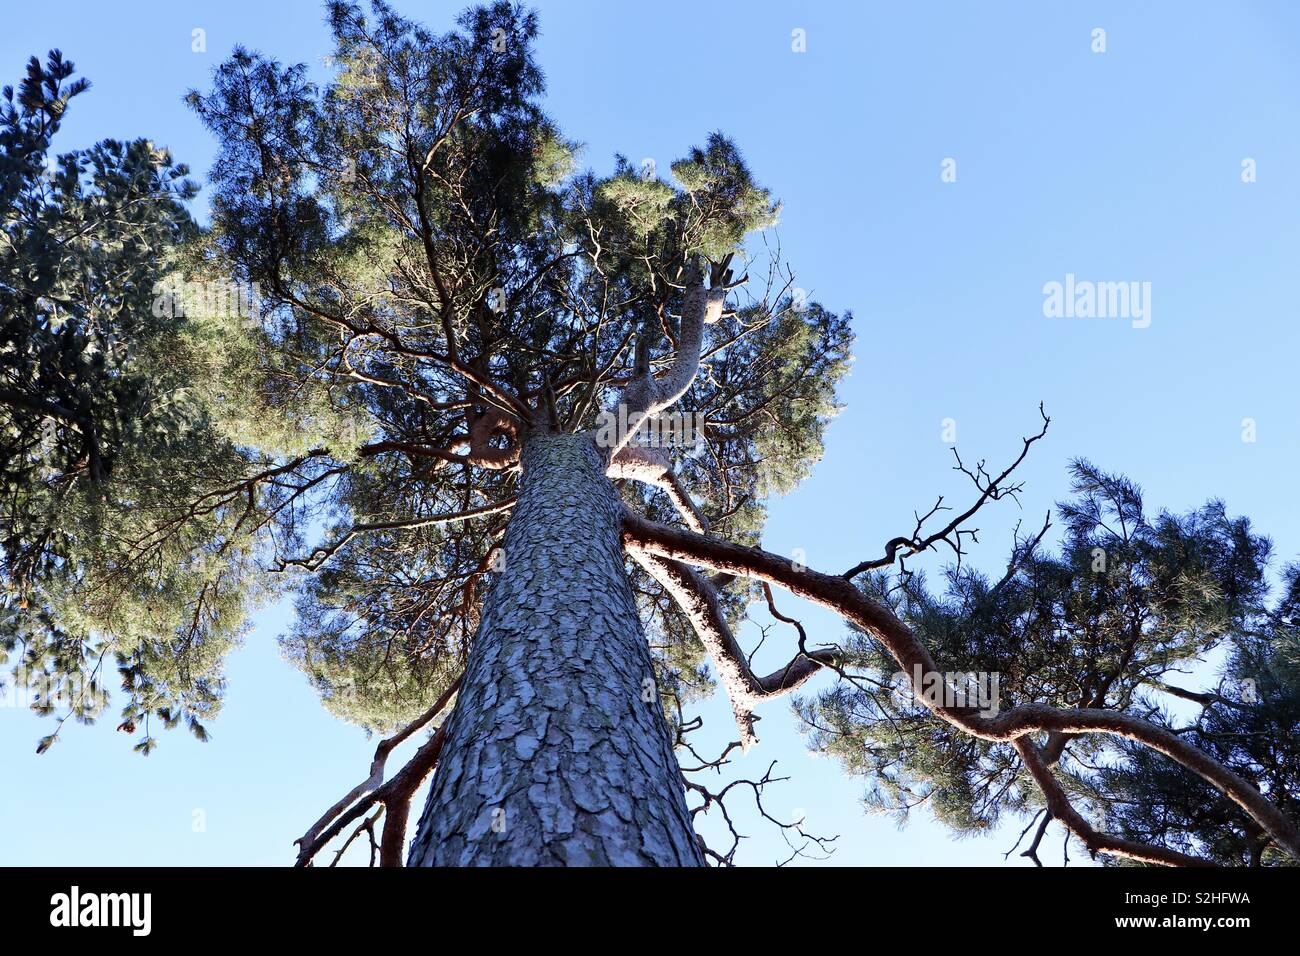 Vertical image of tree with blue skies Stock Photo